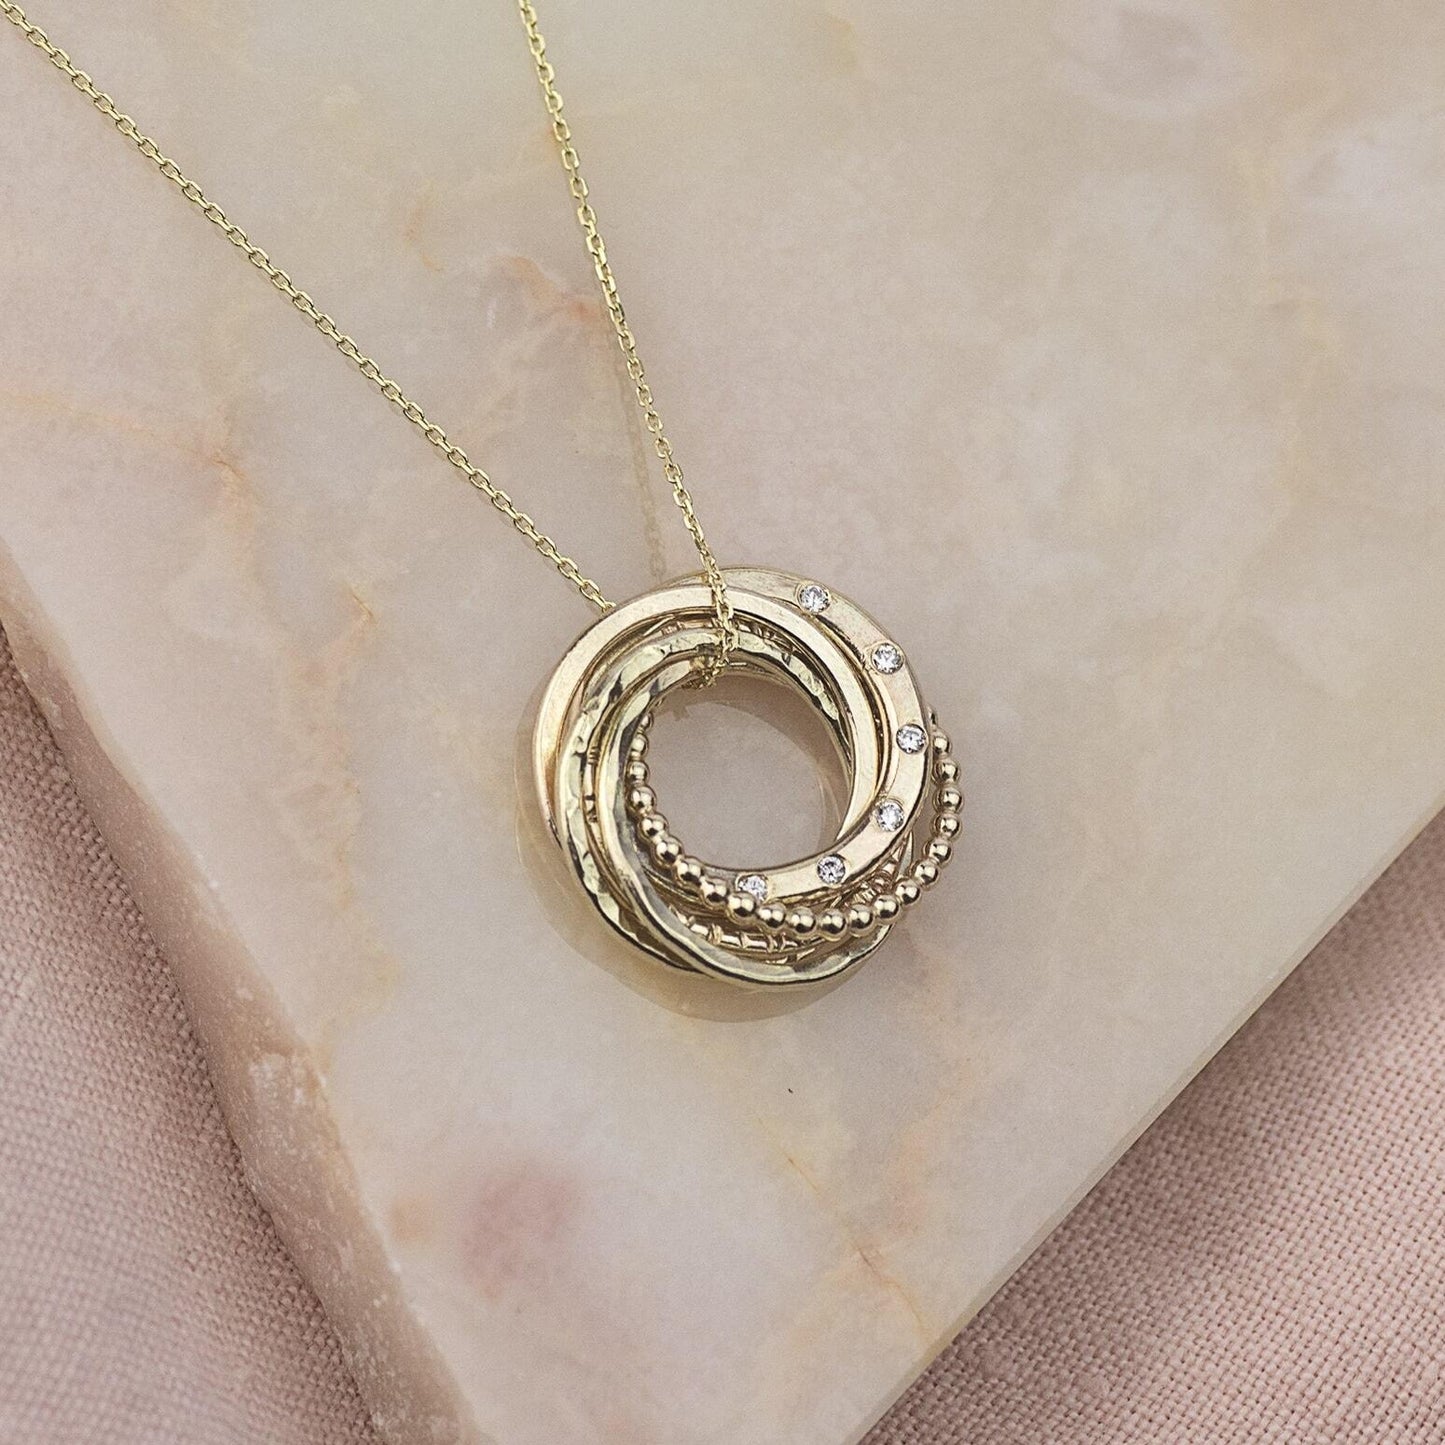 9kt 60th Birthday Necklace - 6 Diamonds for 6 Decades Necklace - Recycled Gold, Rose Gold & Silver